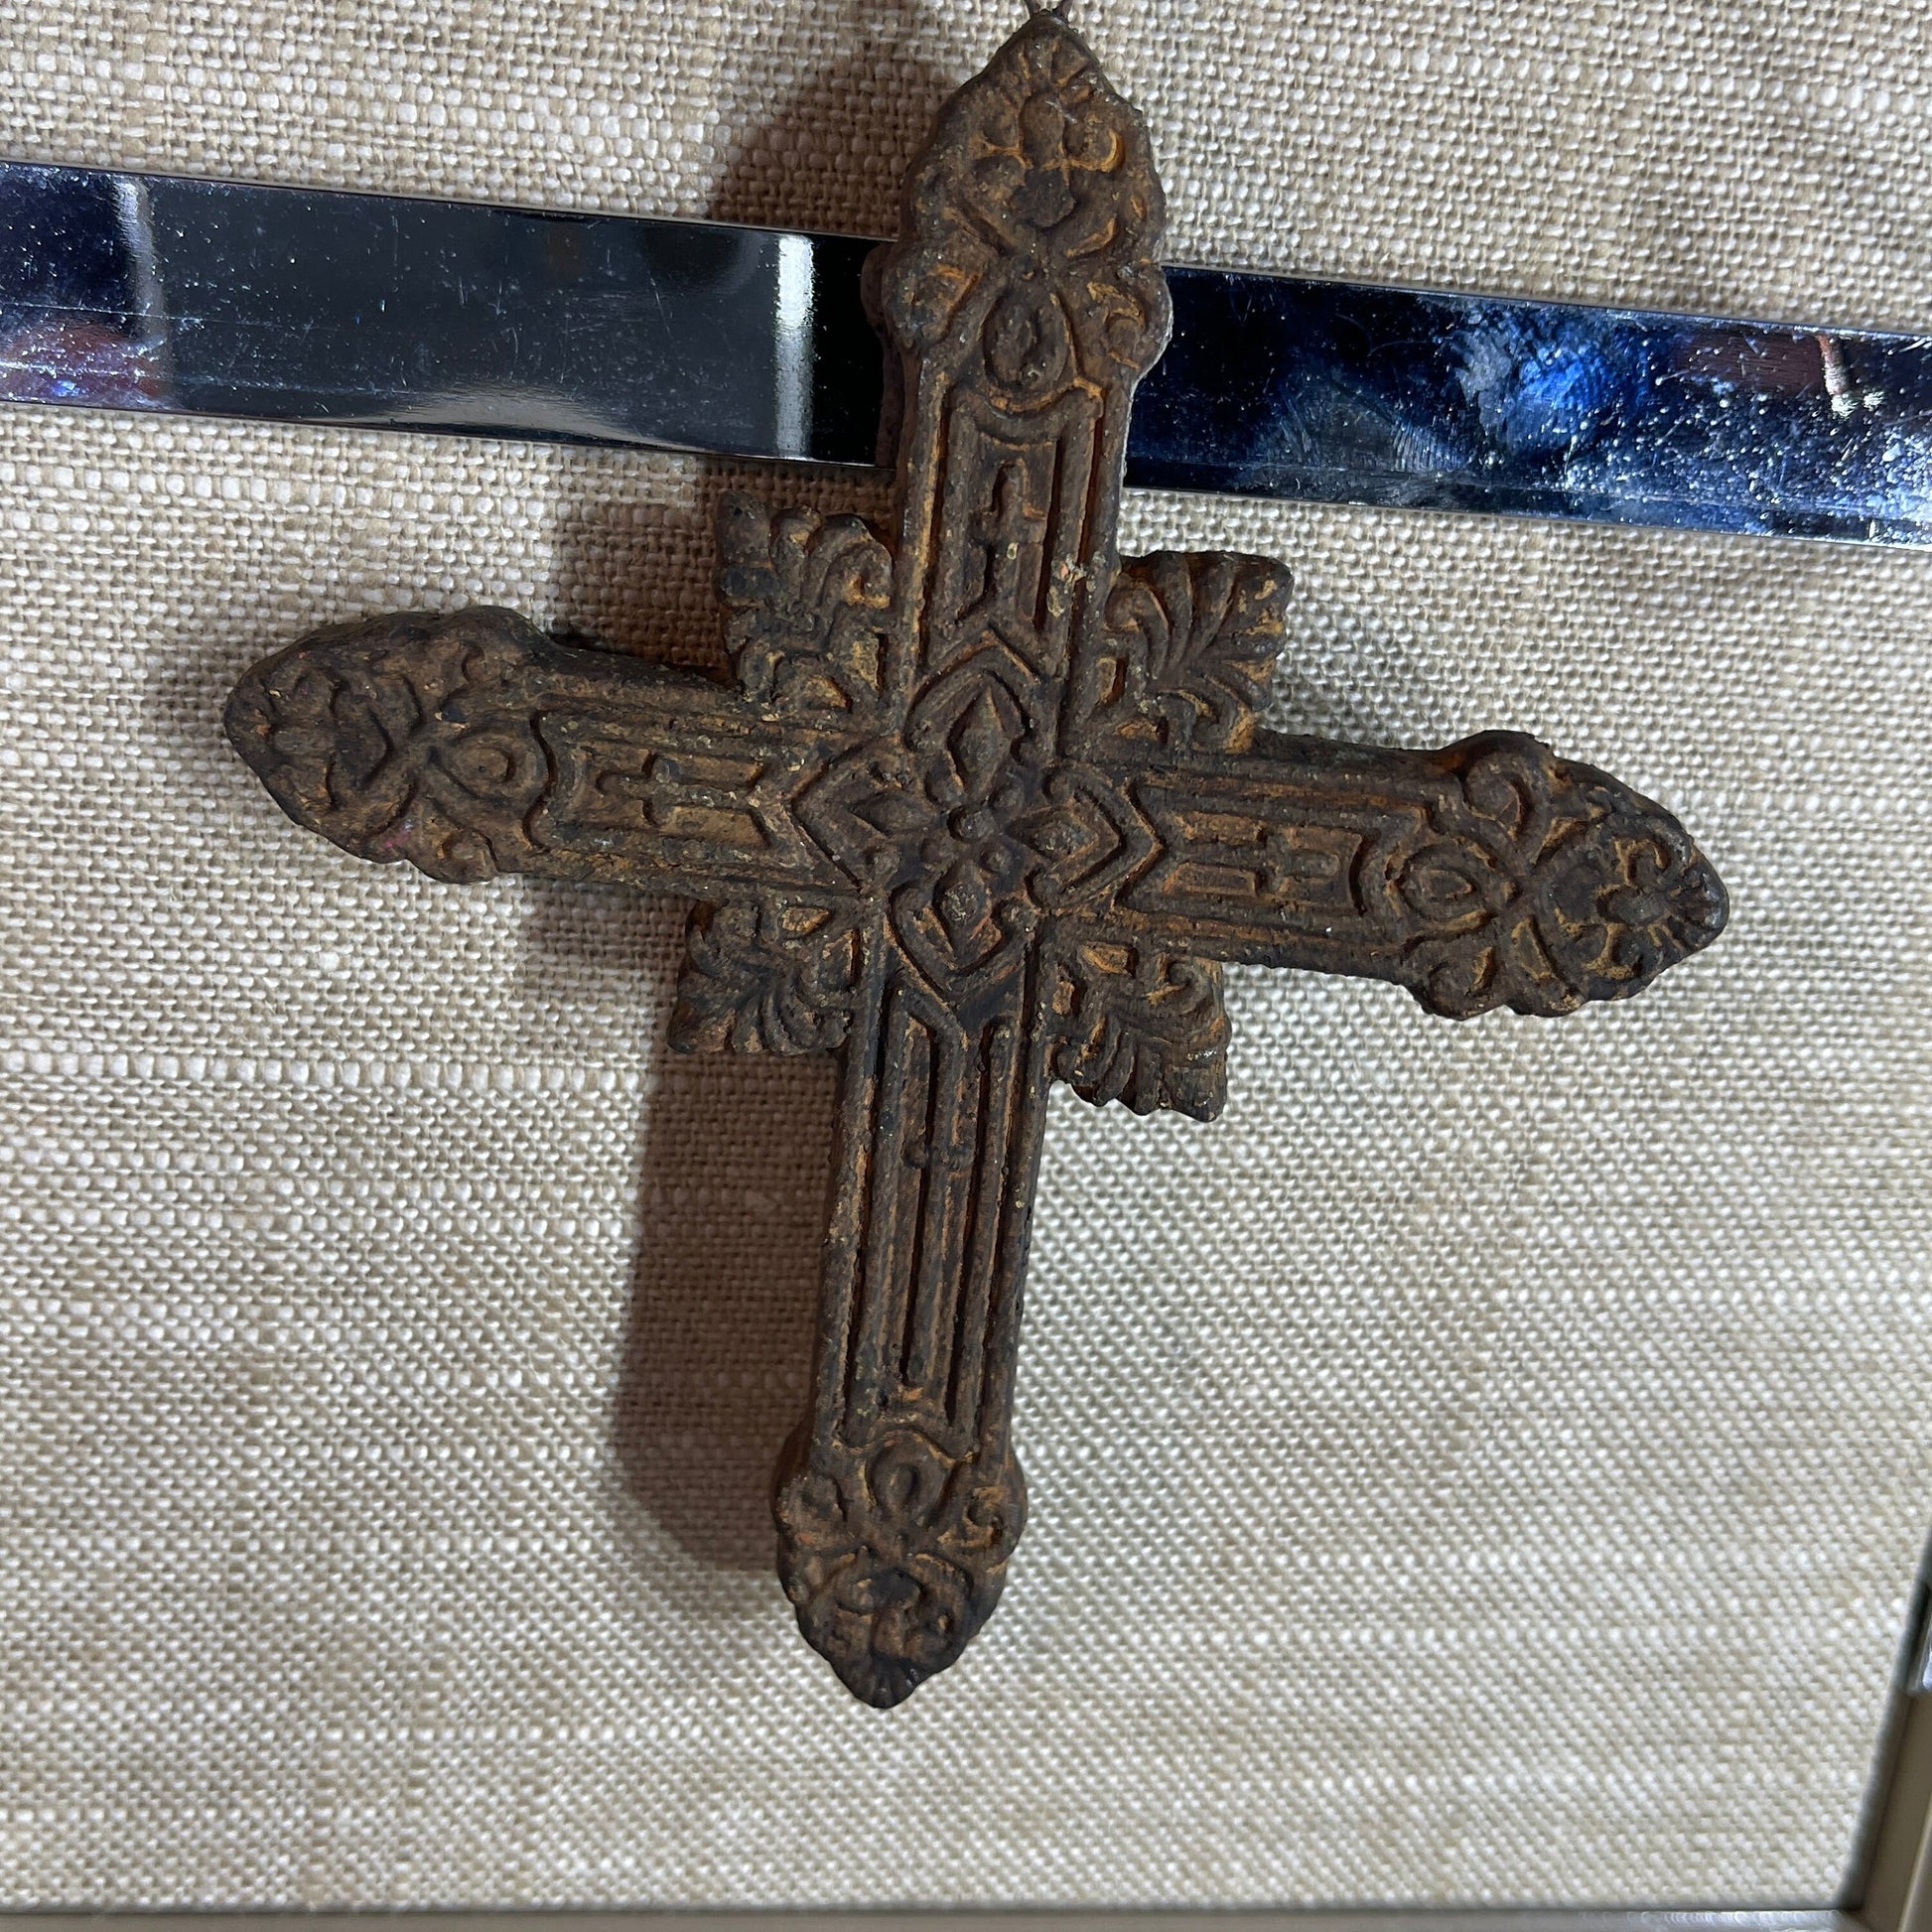 Intricately detailed carved wooden Holy Cross ornament